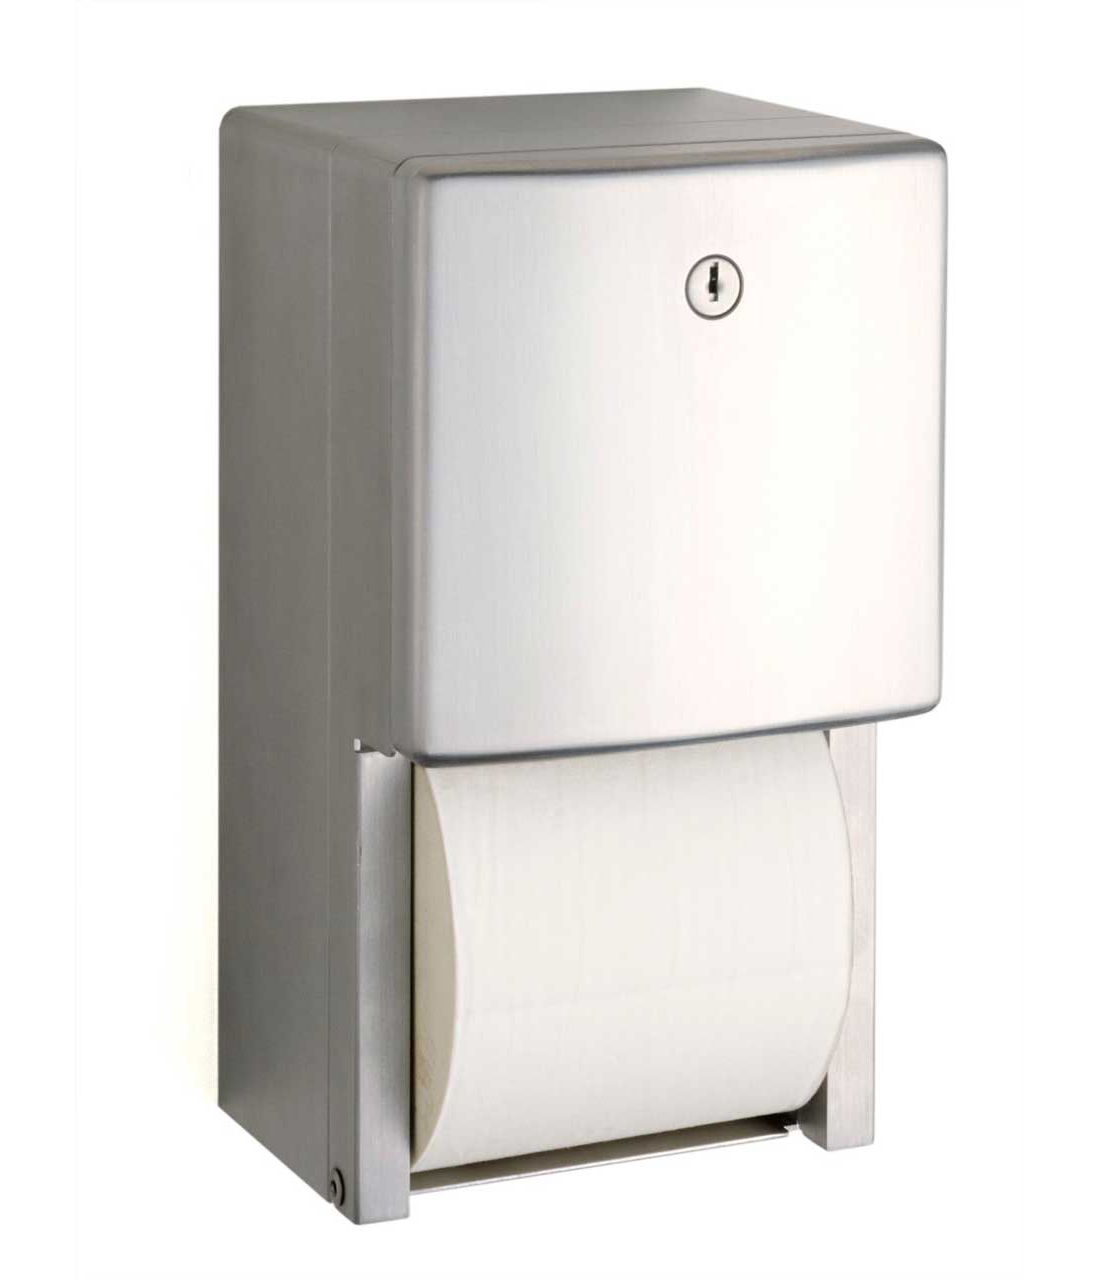 Bobrick 4262 ConturaSeries Stainless Steel Surface-mounted Paper Towel Dispenser for sale online 